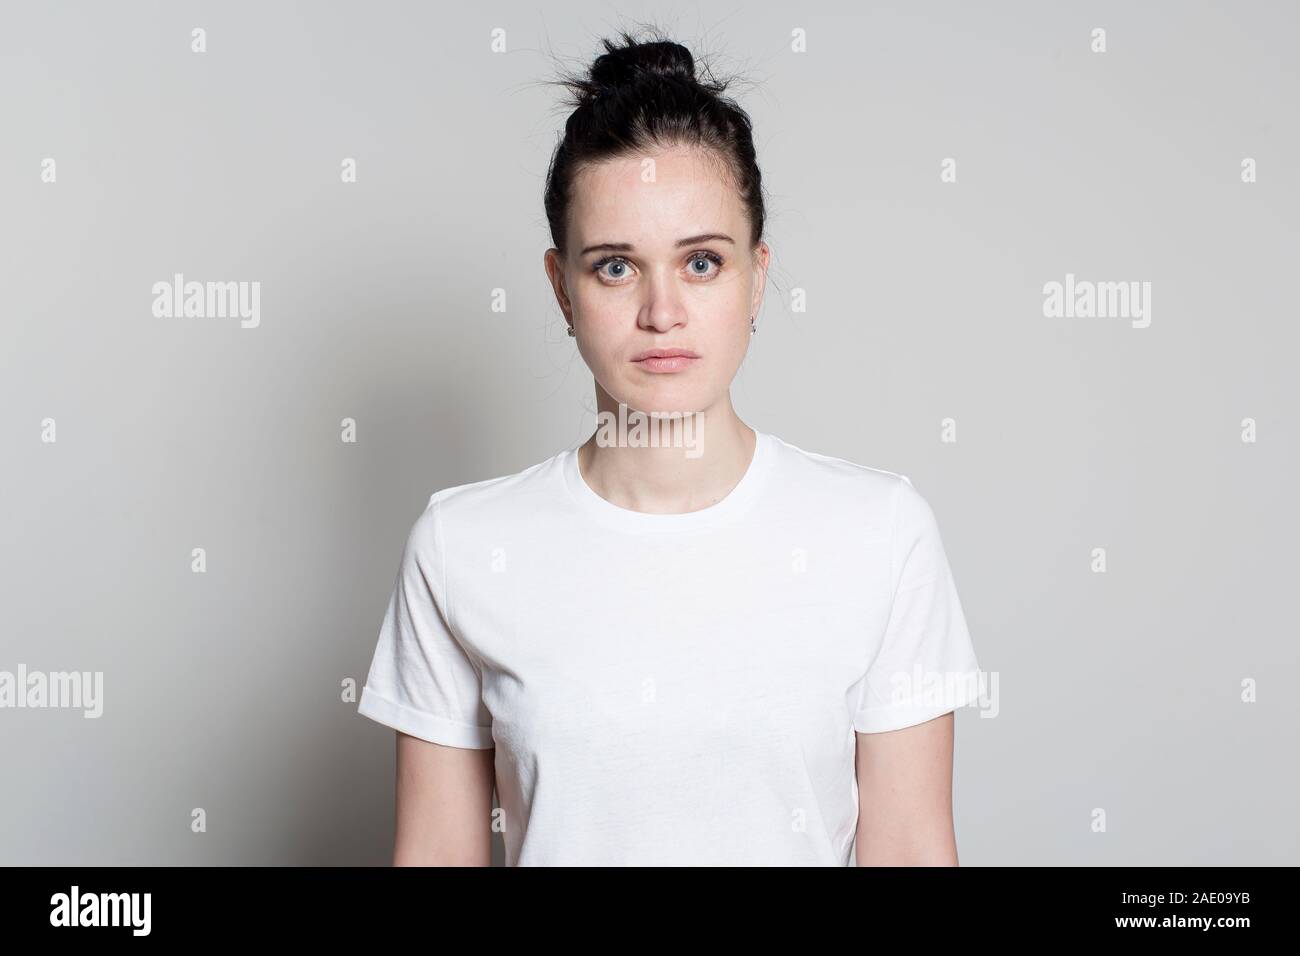 Little frightened, unsure of herself, a pretty young woman stares intently into the camera with big eyes. Stock Photo